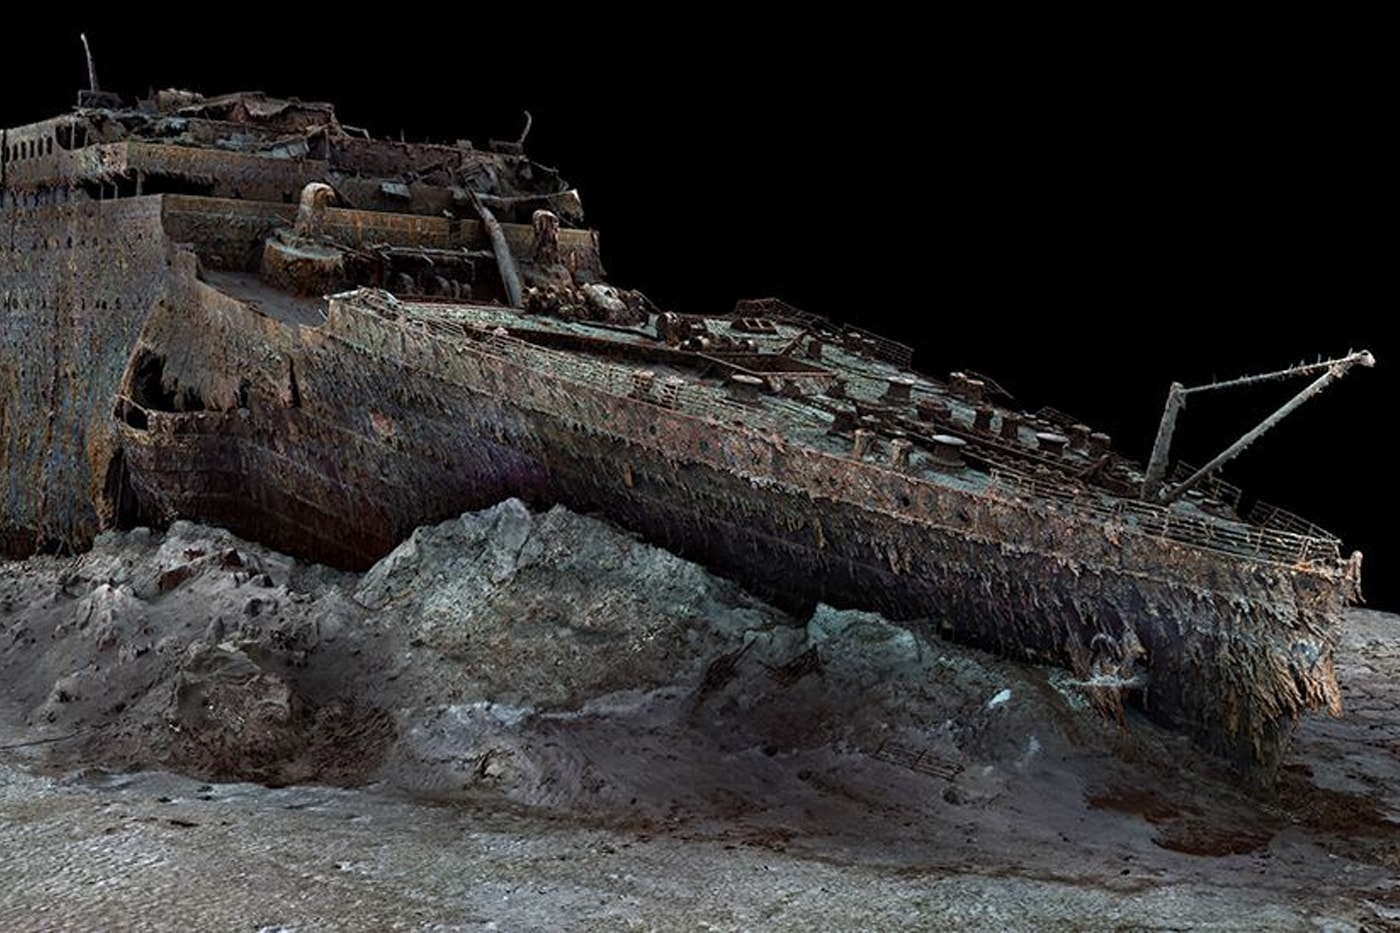 Romeo and Juliet Submersibles Capture First Full-Sized Scan of the Titanic 3D what happened info